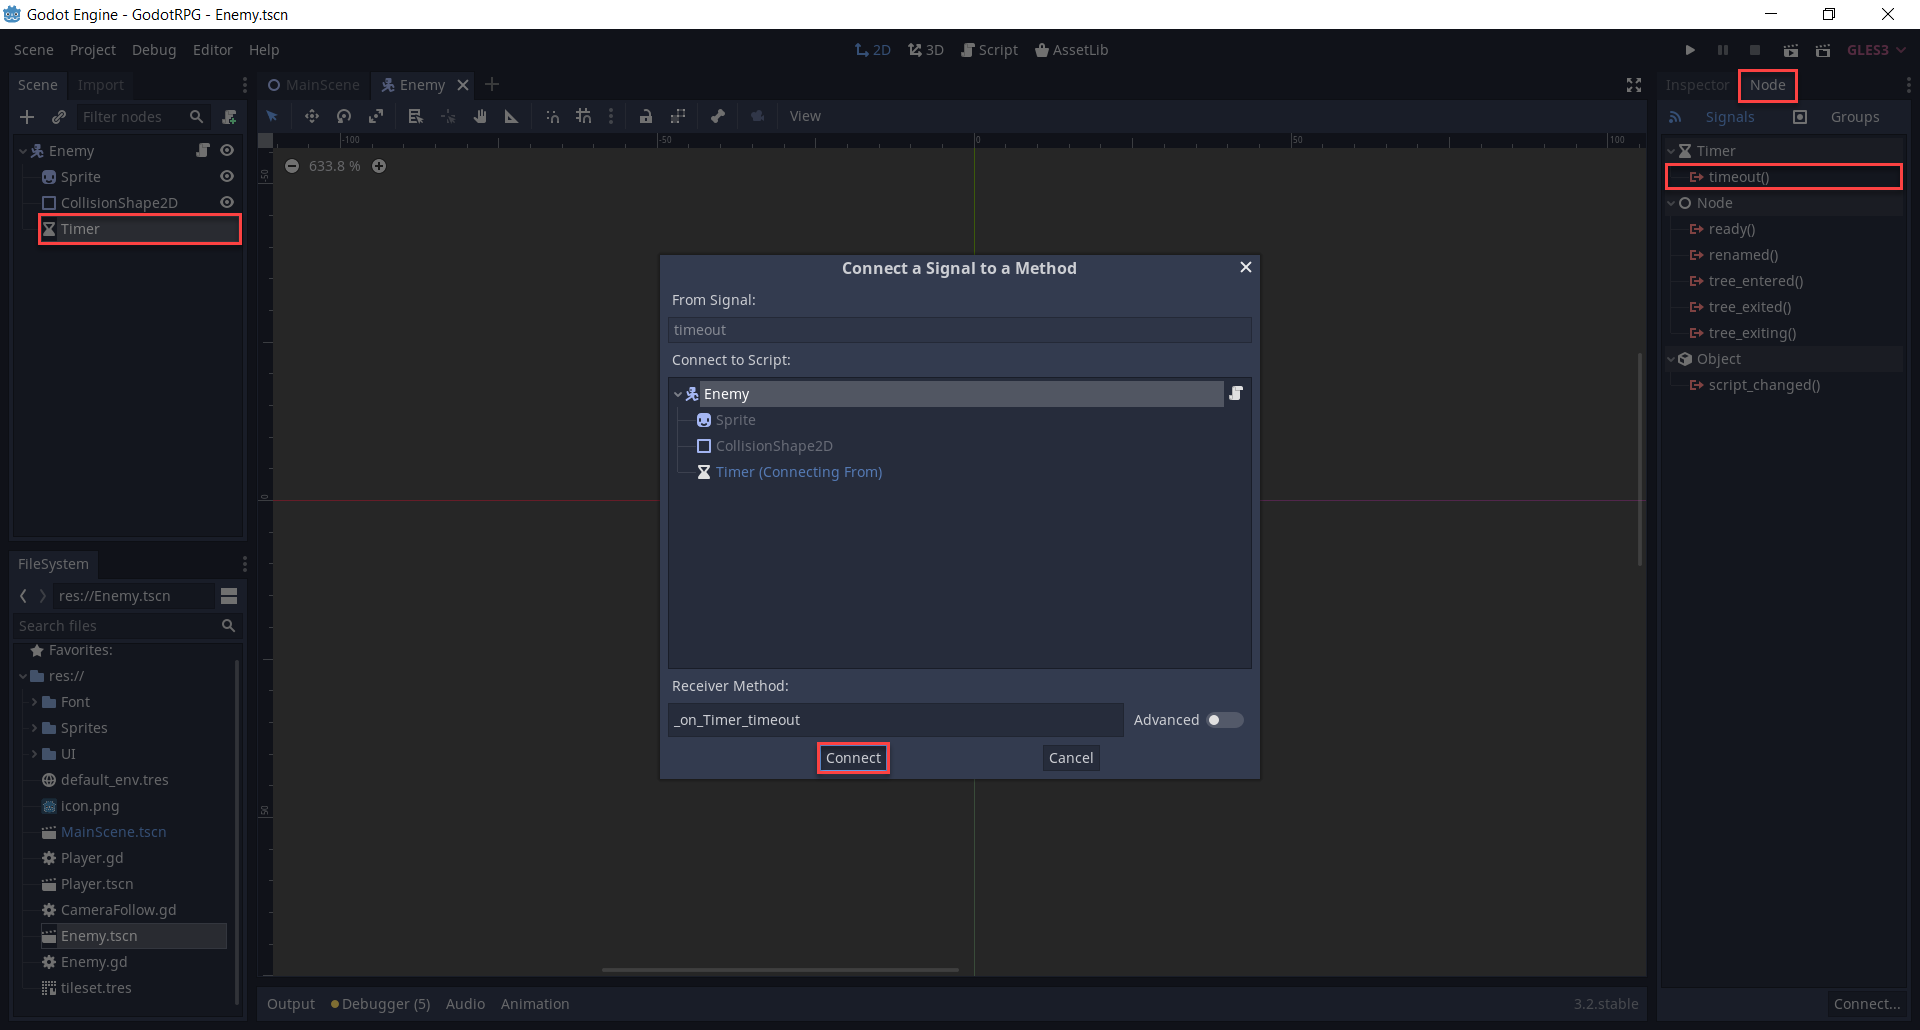 Godot Timer's Connect a Signal to a Method window